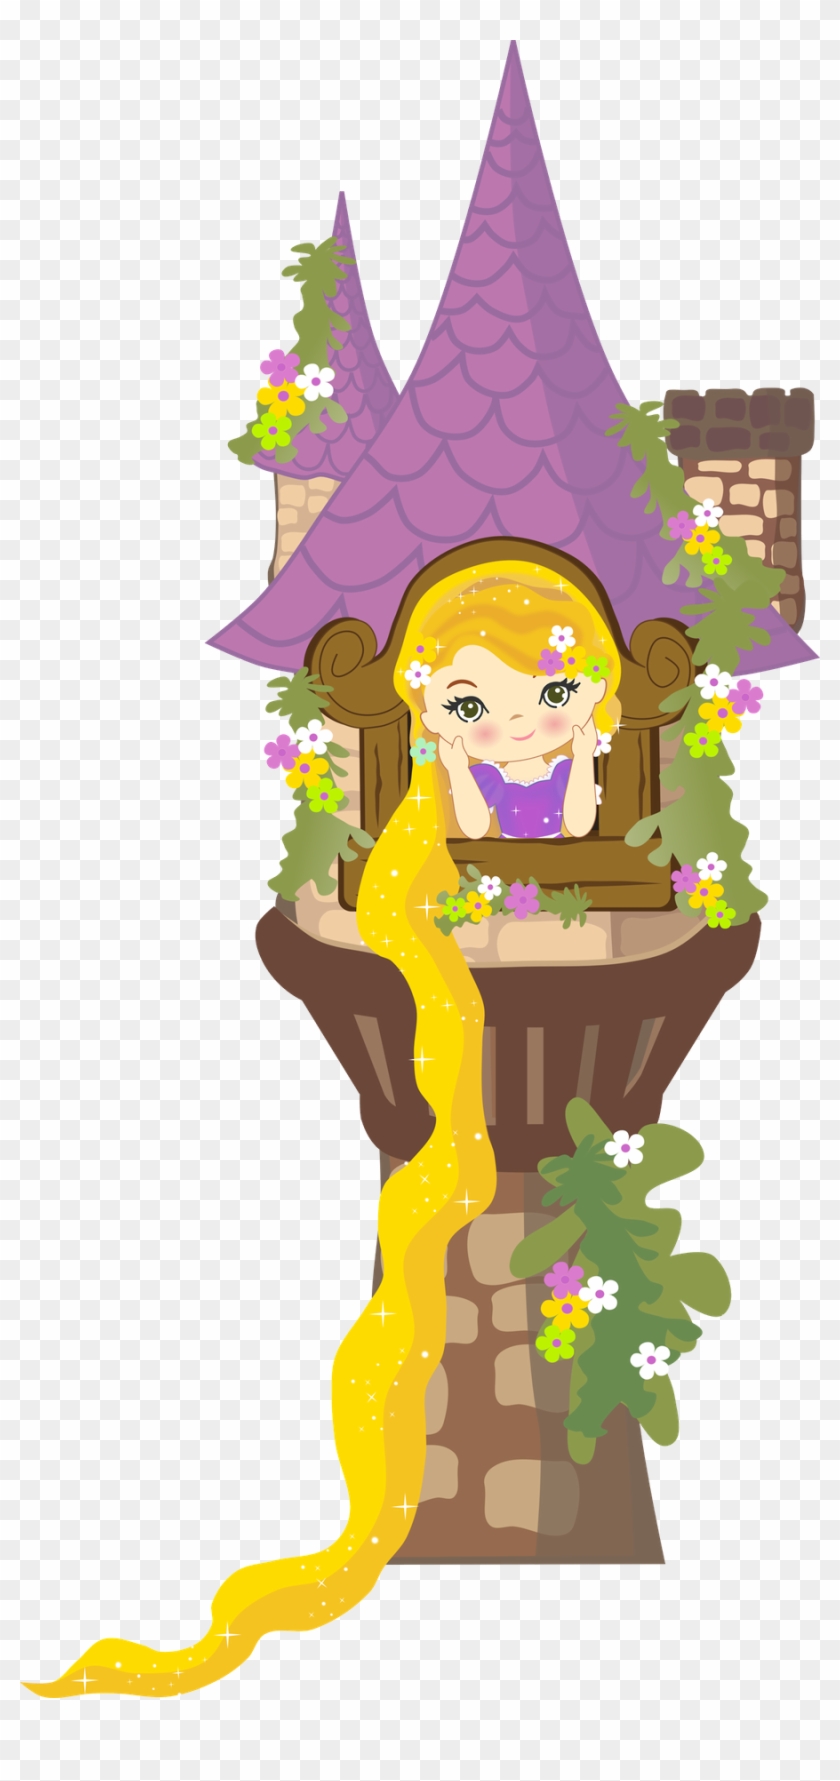 Clipart Freeuse Library Minus Say Hello Brave More - Rapunzel Tower Clip Art - Png Download